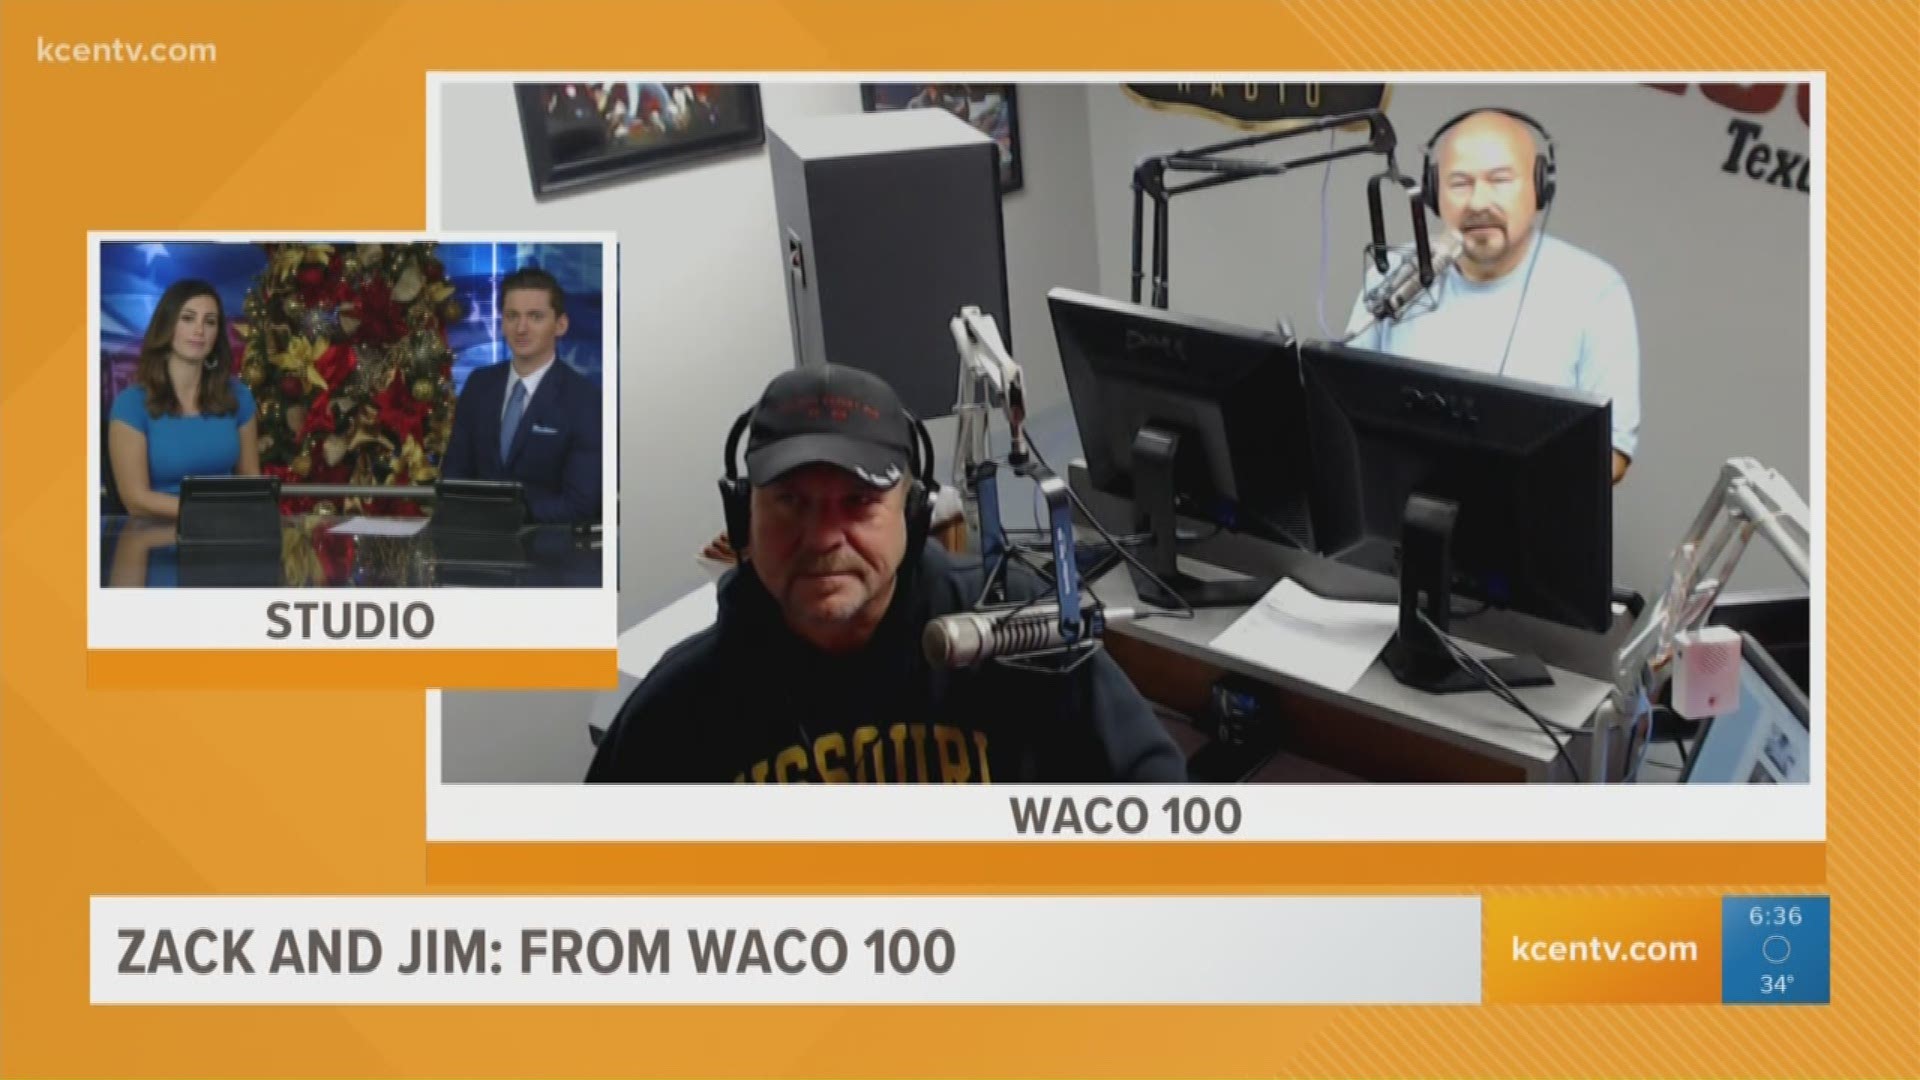 Zack & Jim from Waco 100 joins Texas Today